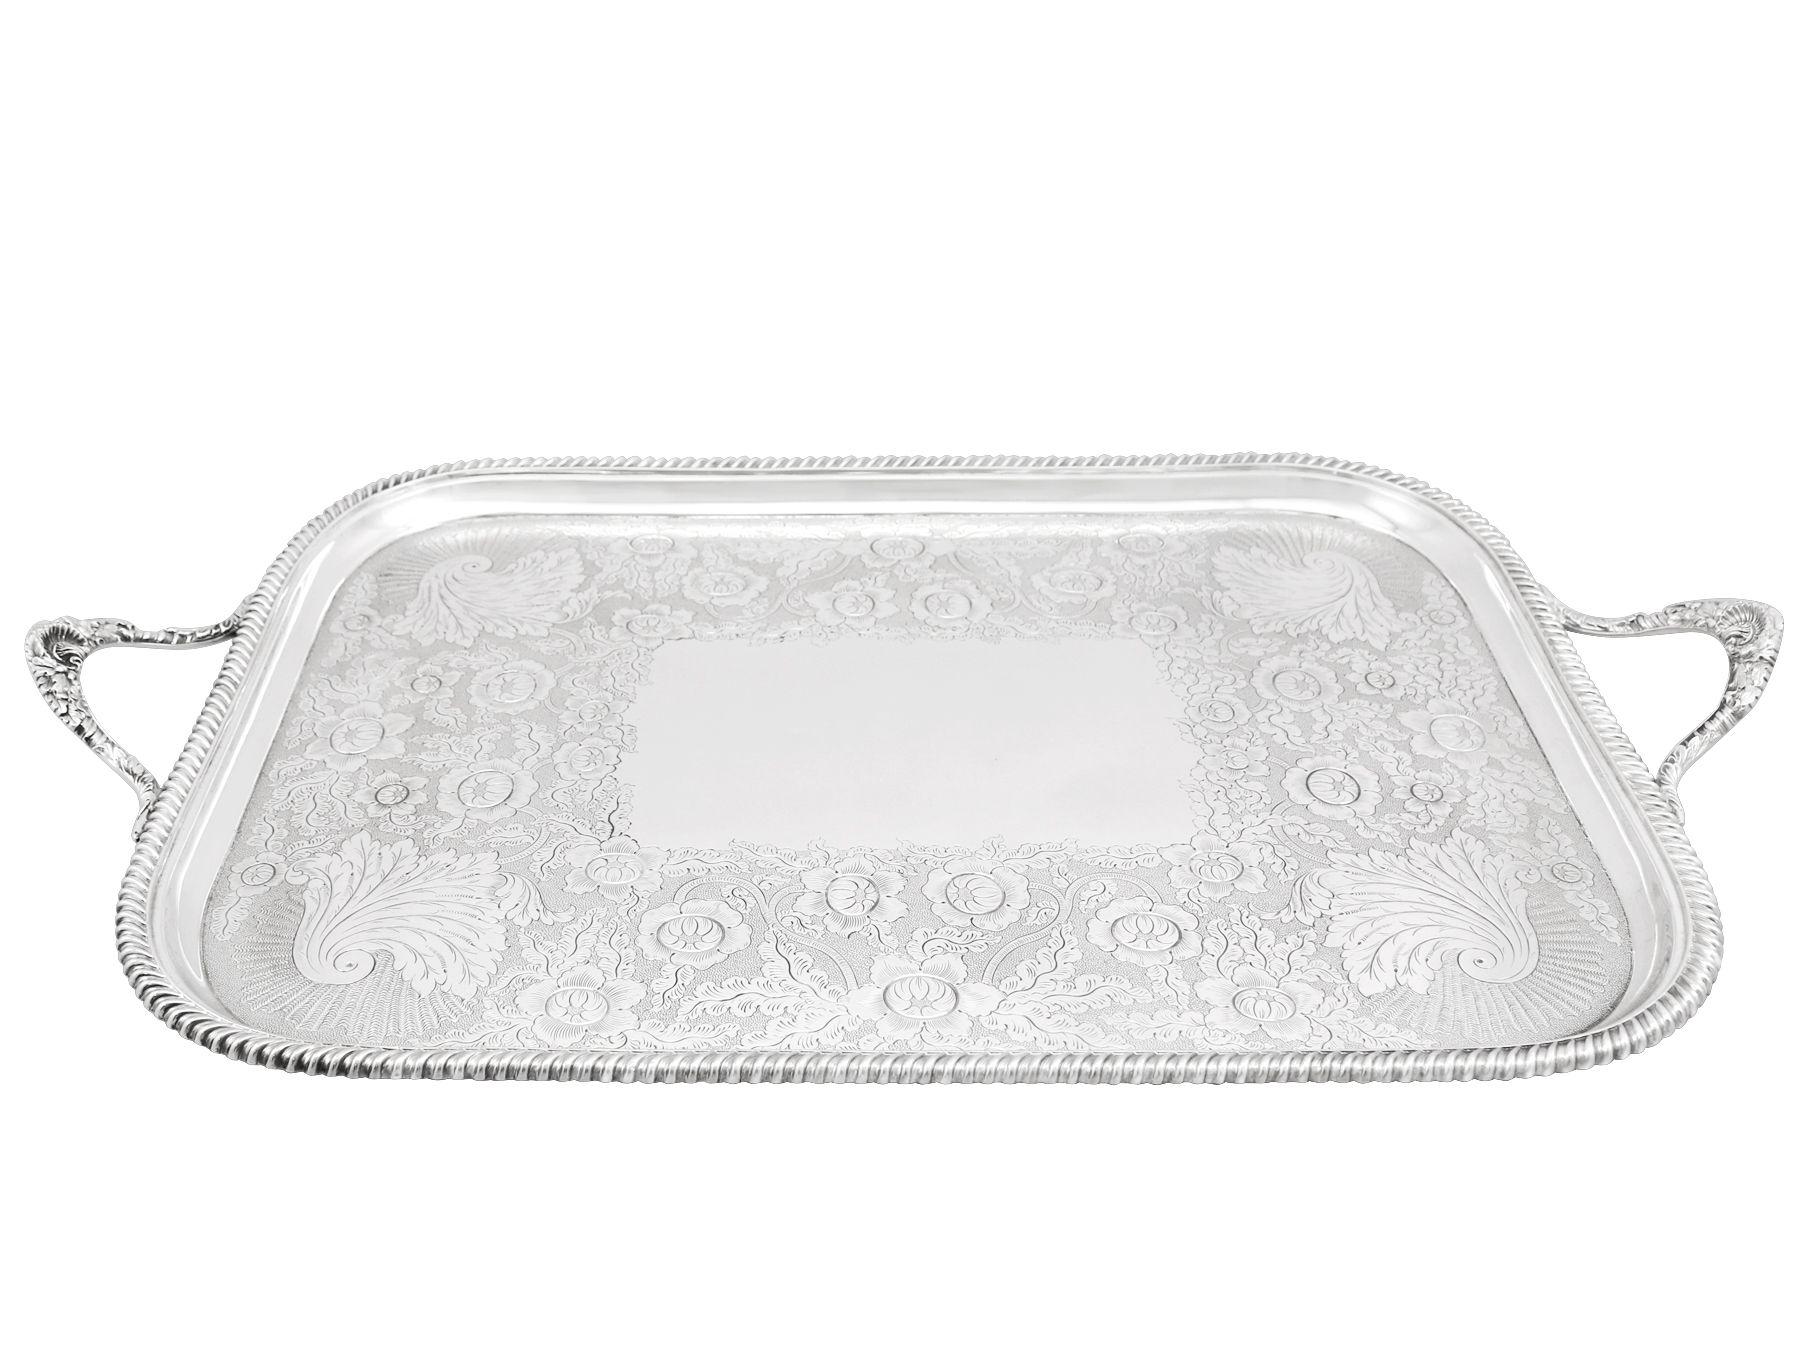 A magnificent, Fine and impressive, large antique Victorian English sterling silver two handled tray by Thomas Bradbury & Sons; an addition to our silver tray collection.

This magnificent, Fine and impressive antique Victorian sterling silver